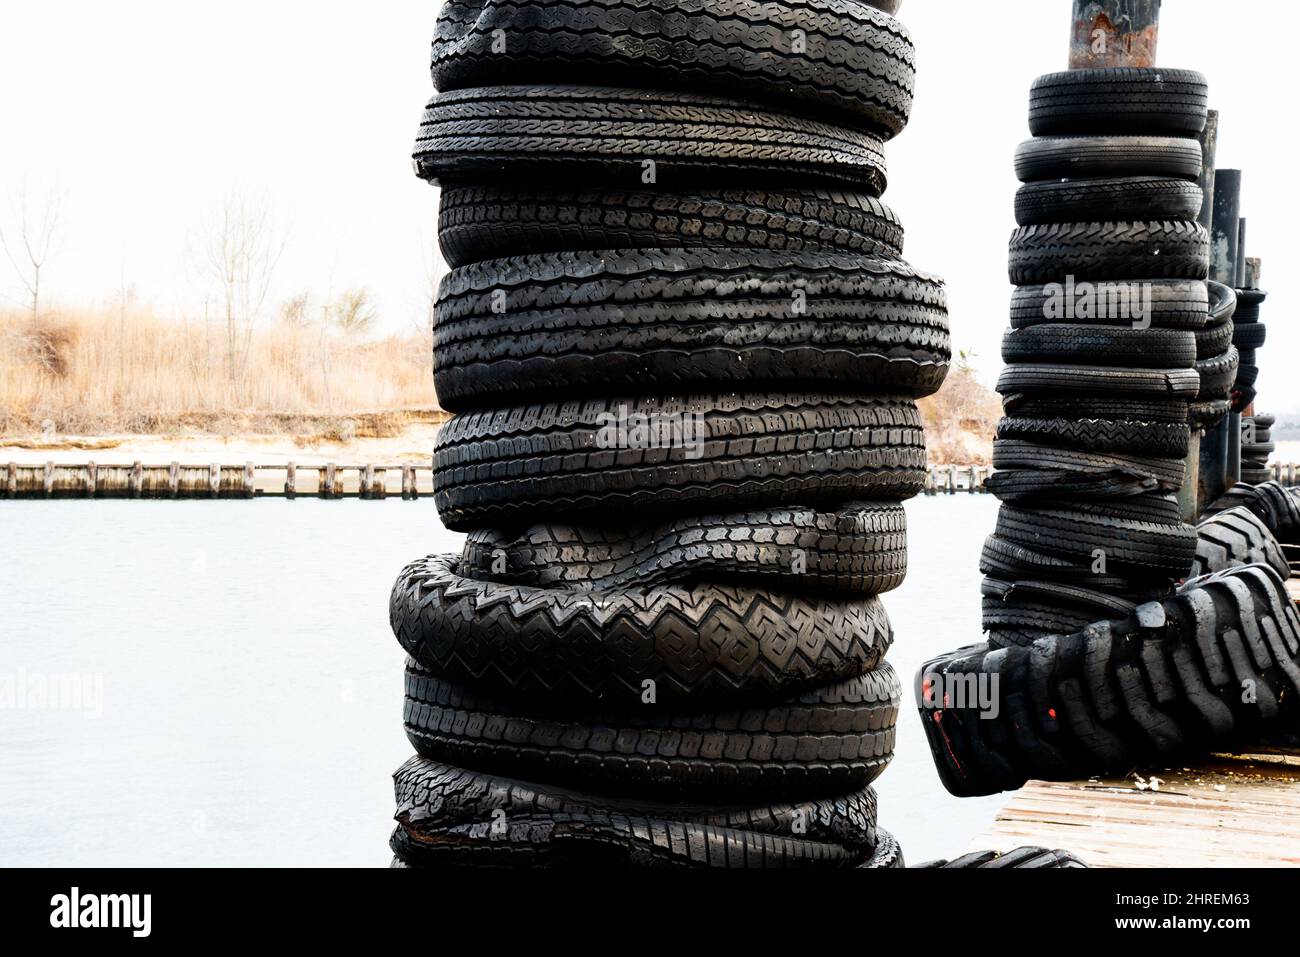 Old tires as dock bumpers Stock Photo